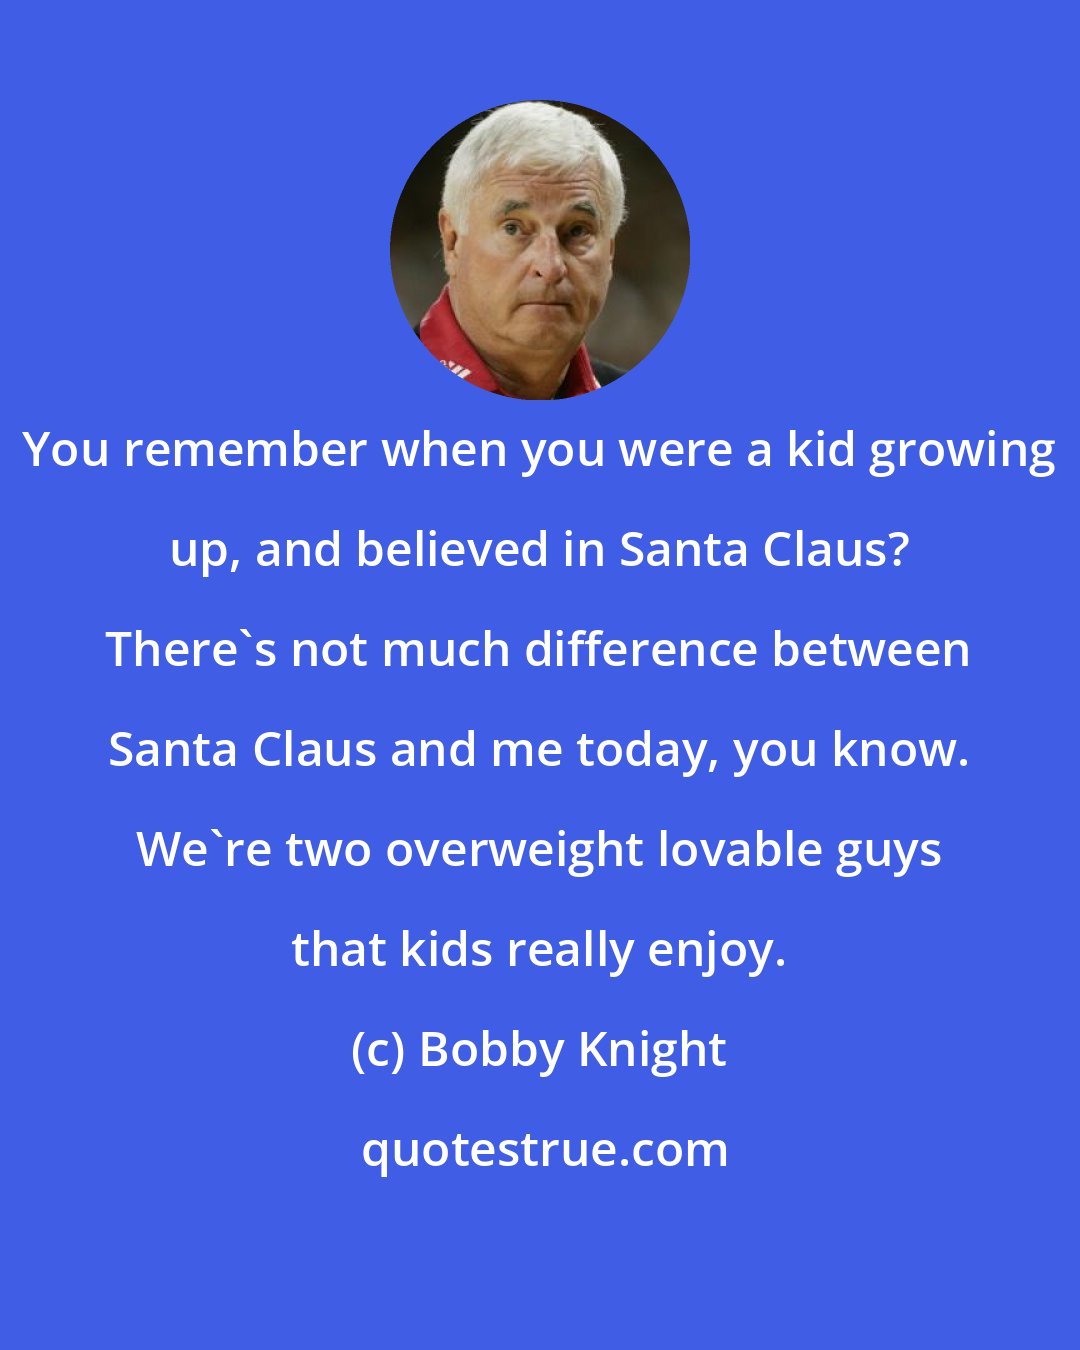 Bobby Knight: You remember when you were a kid growing up, and believed in Santa Claus? There's not much difference between Santa Claus and me today, you know. We're two overweight lovable guys that kids really enjoy.